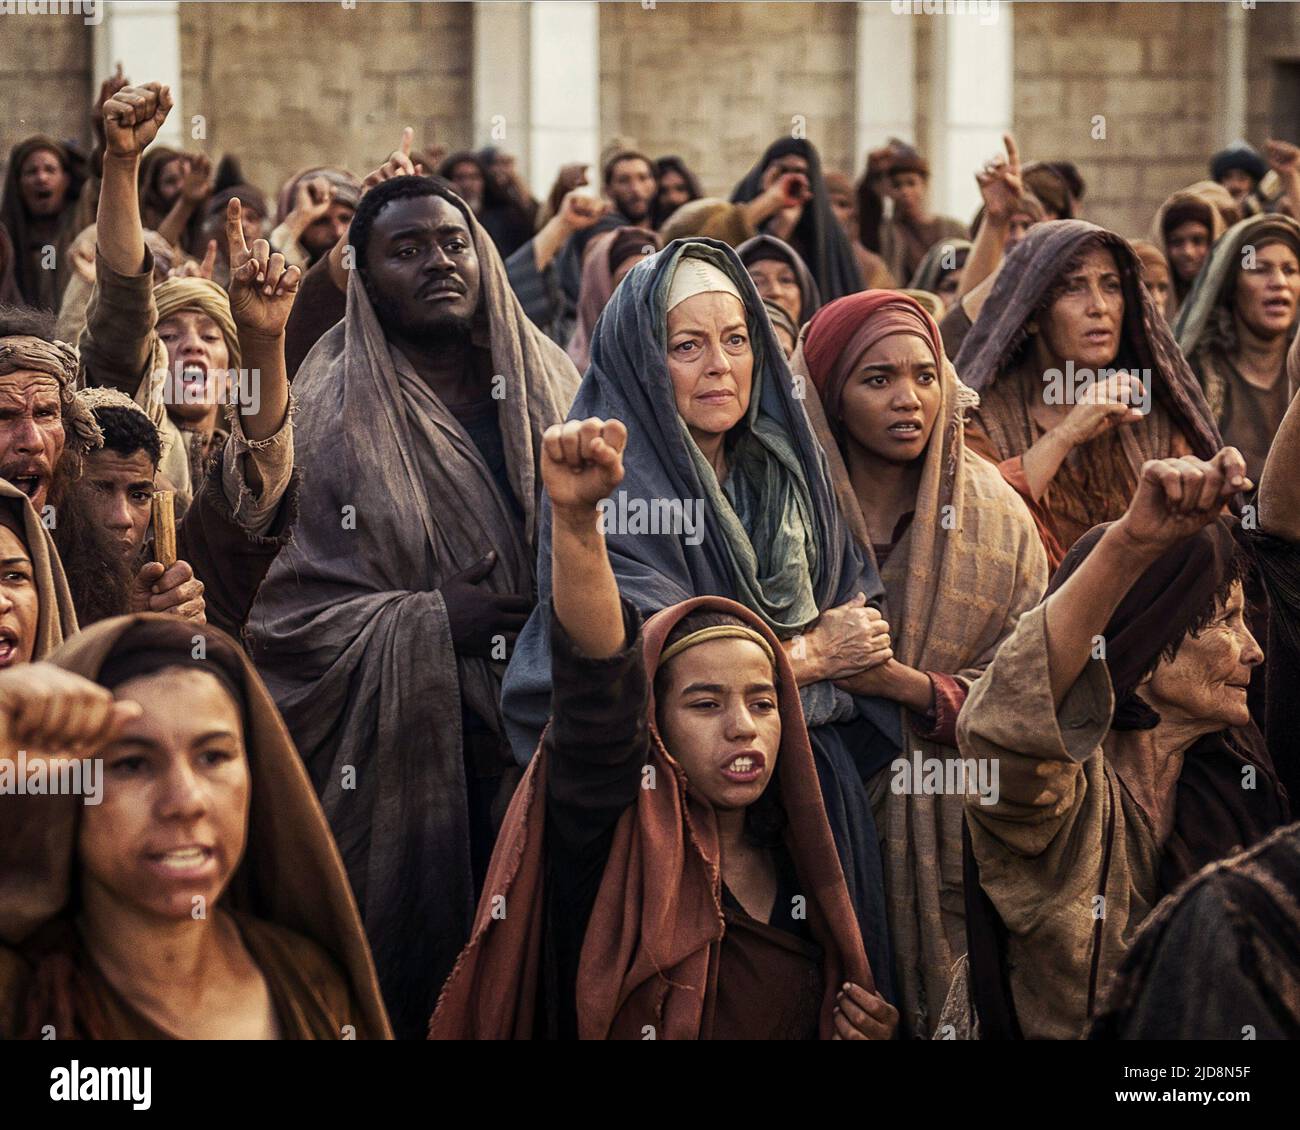 CEESAY,SCACCHI,CHUNG, A.D. THE BIBLE CONTINUES, 2015, Stock Photo